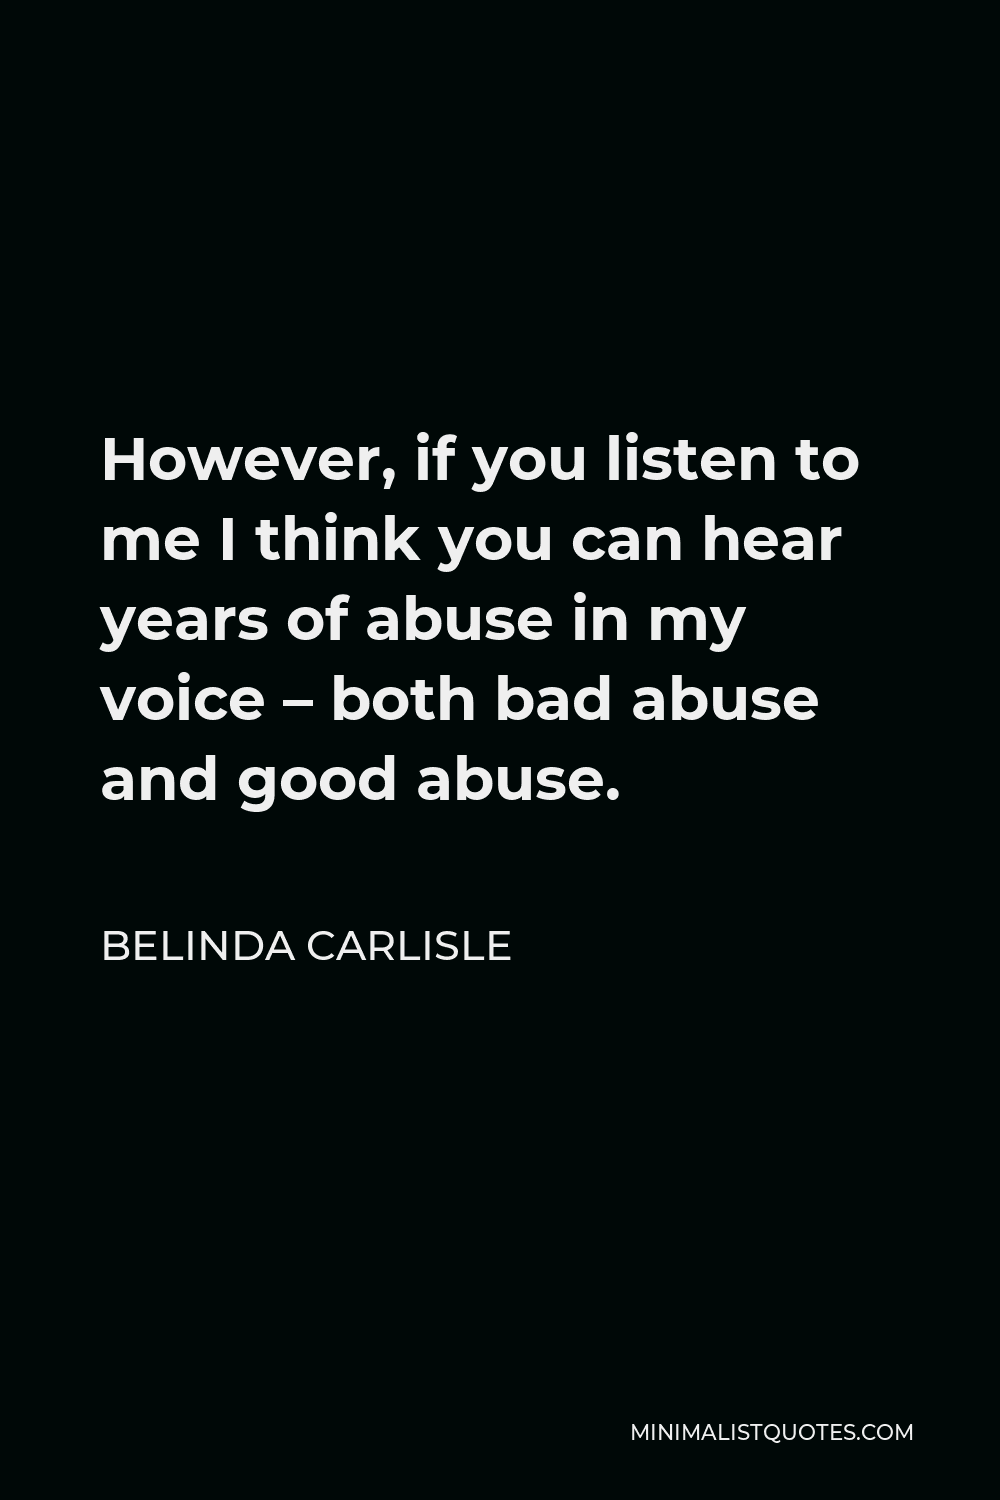 Belinda Carlisle Quote - However, if you listen to me I think you can hear years of abuse in my voice – both bad abuse and good abuse.